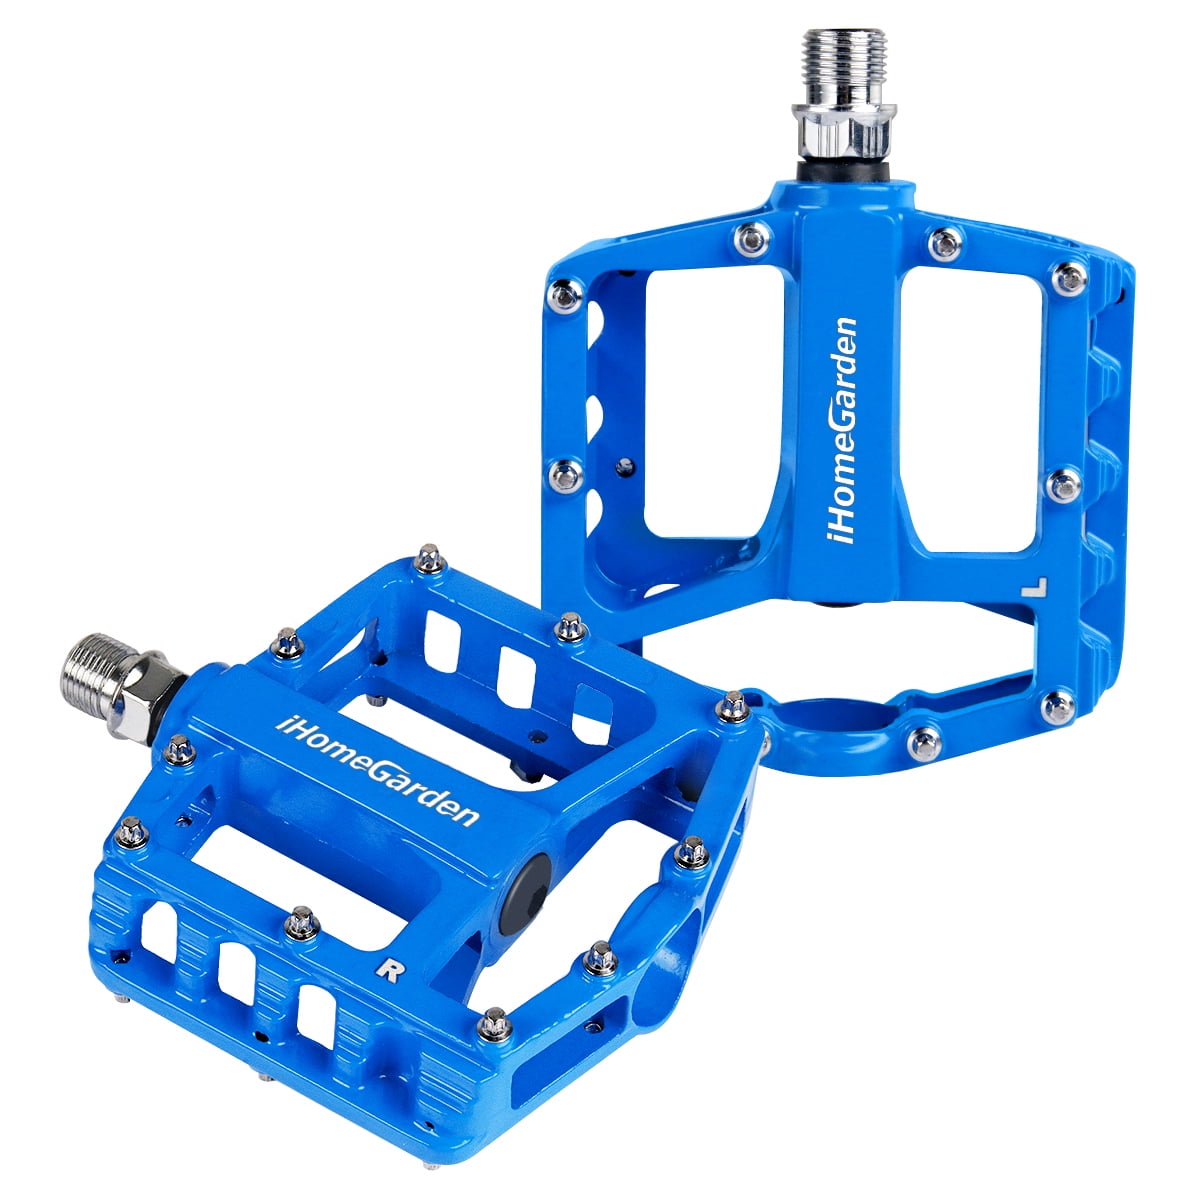 Details about   Ultralight Seal Bearings Bicycle Bike Pedal Flat Platform Bicycle Accessorie 